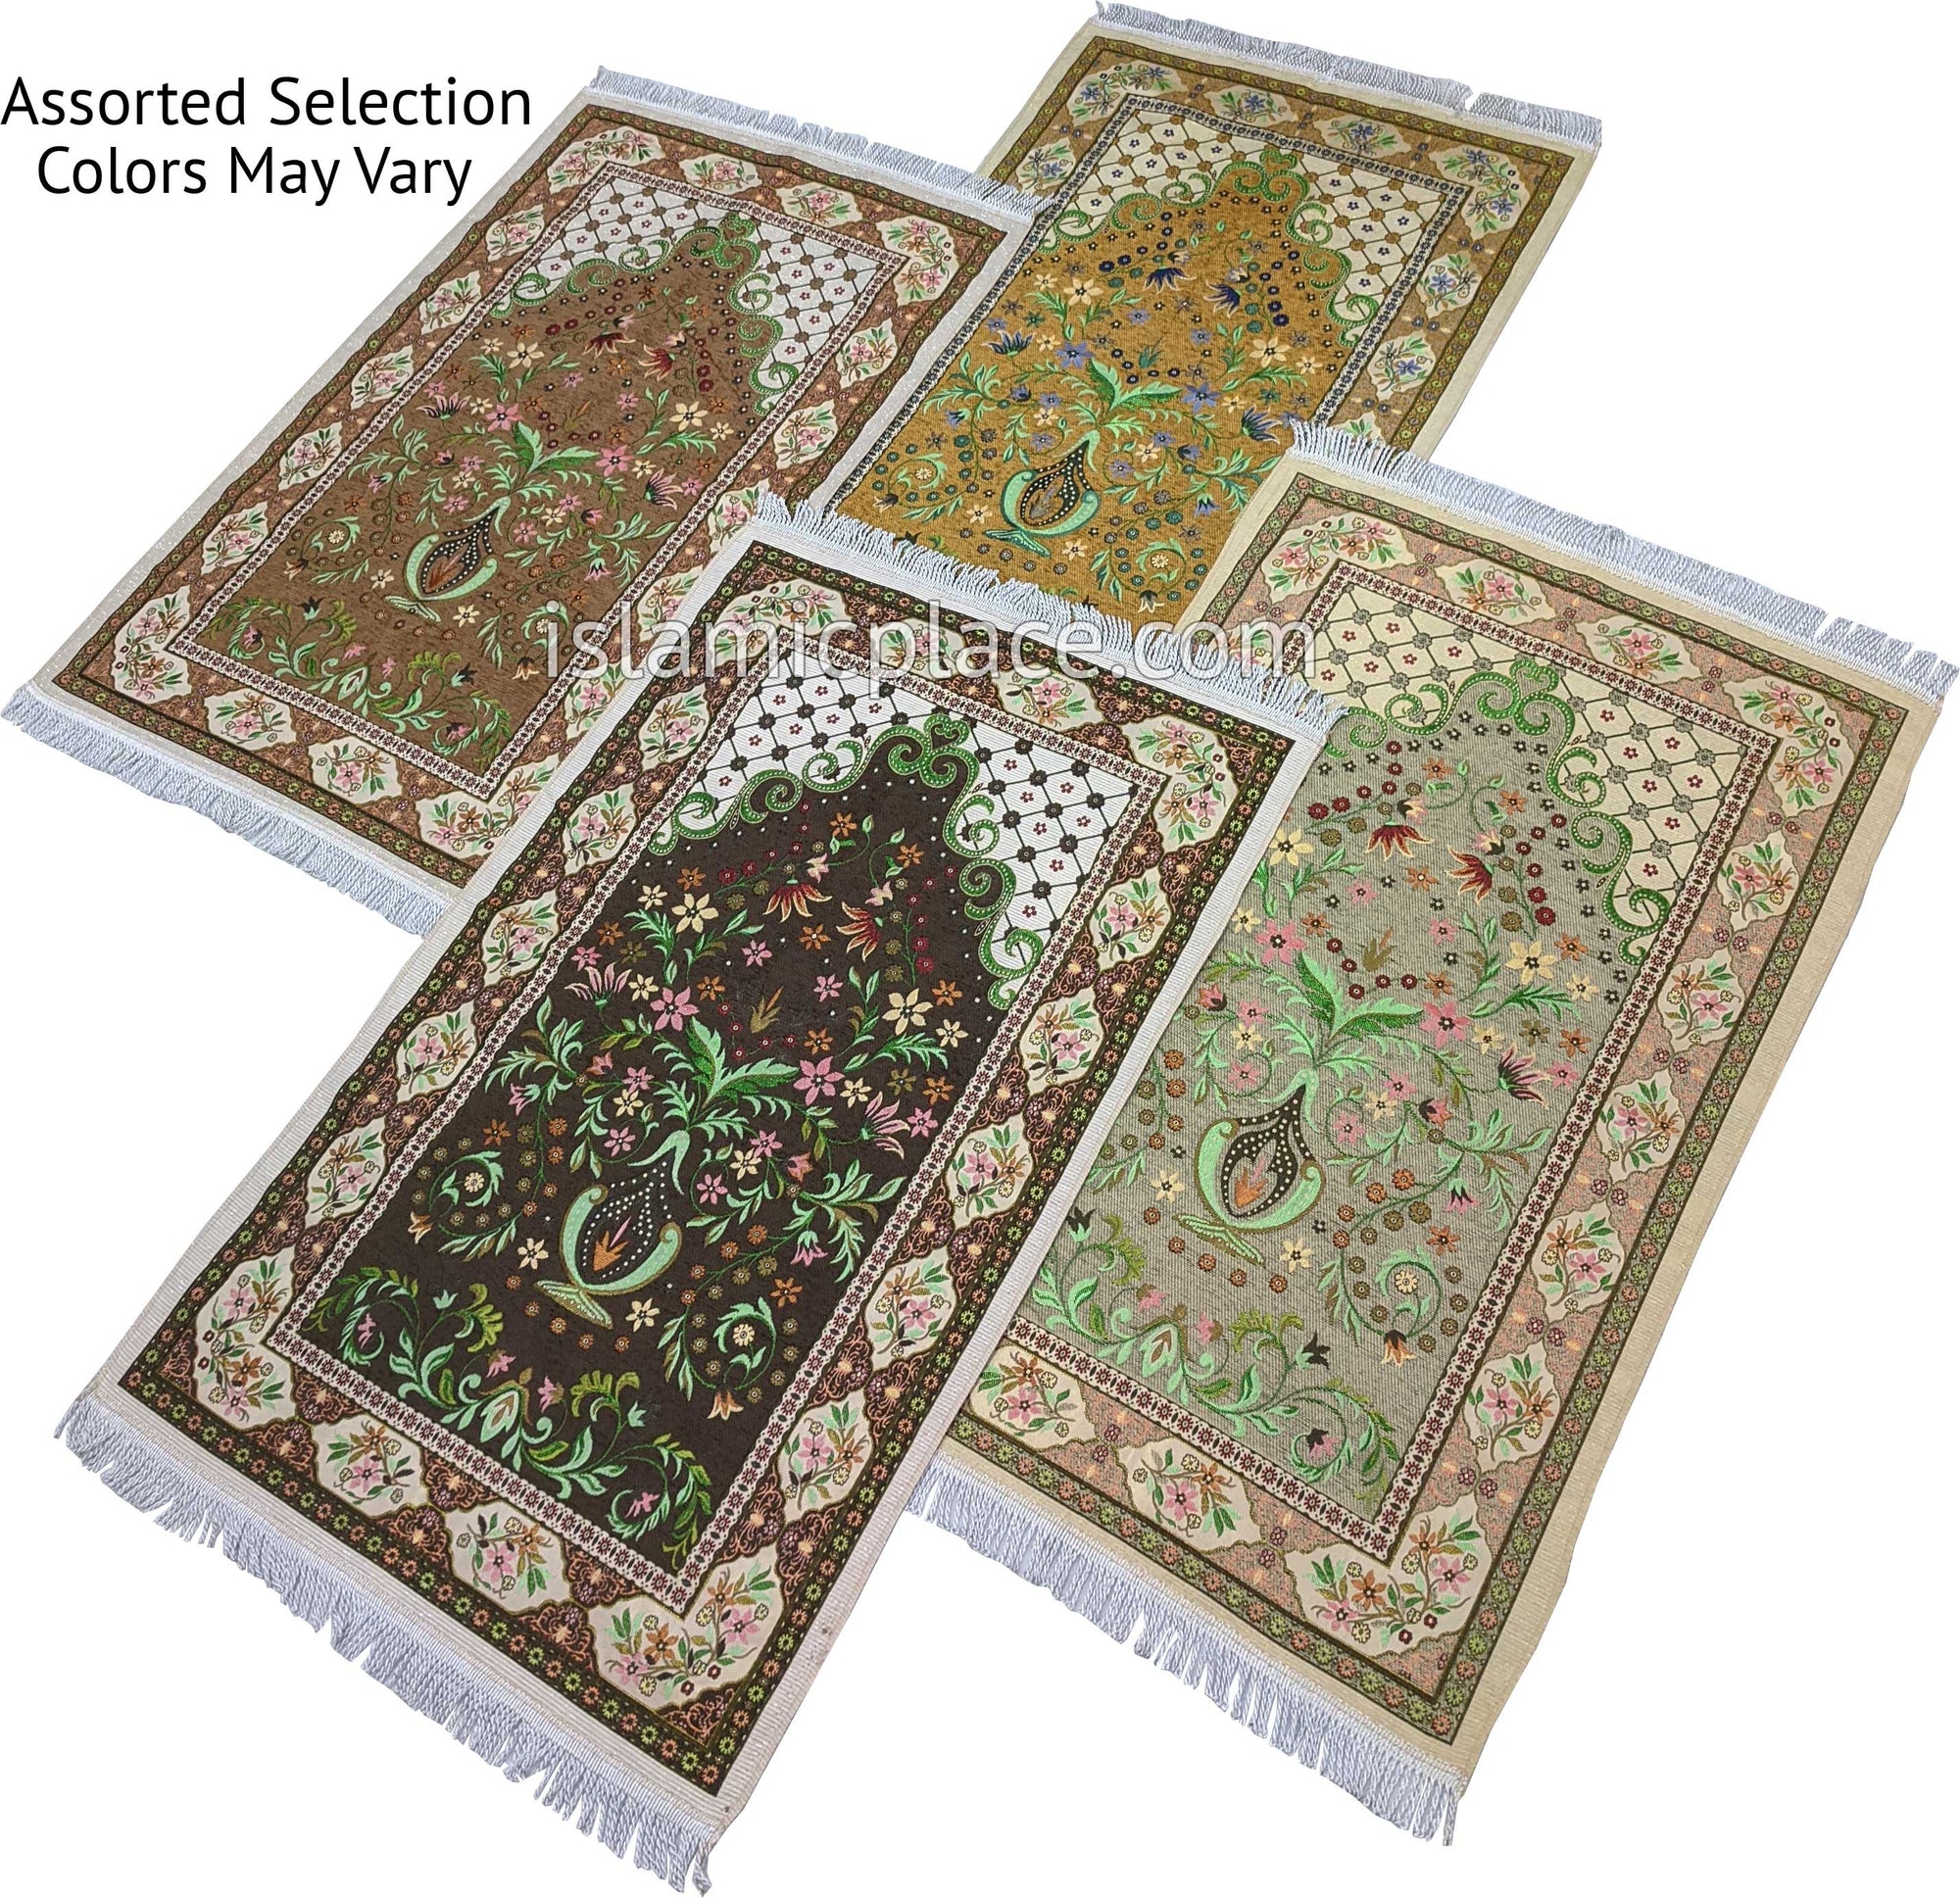 Prayer Rug with Victorian Mihrab Design - Assorted Color Selection